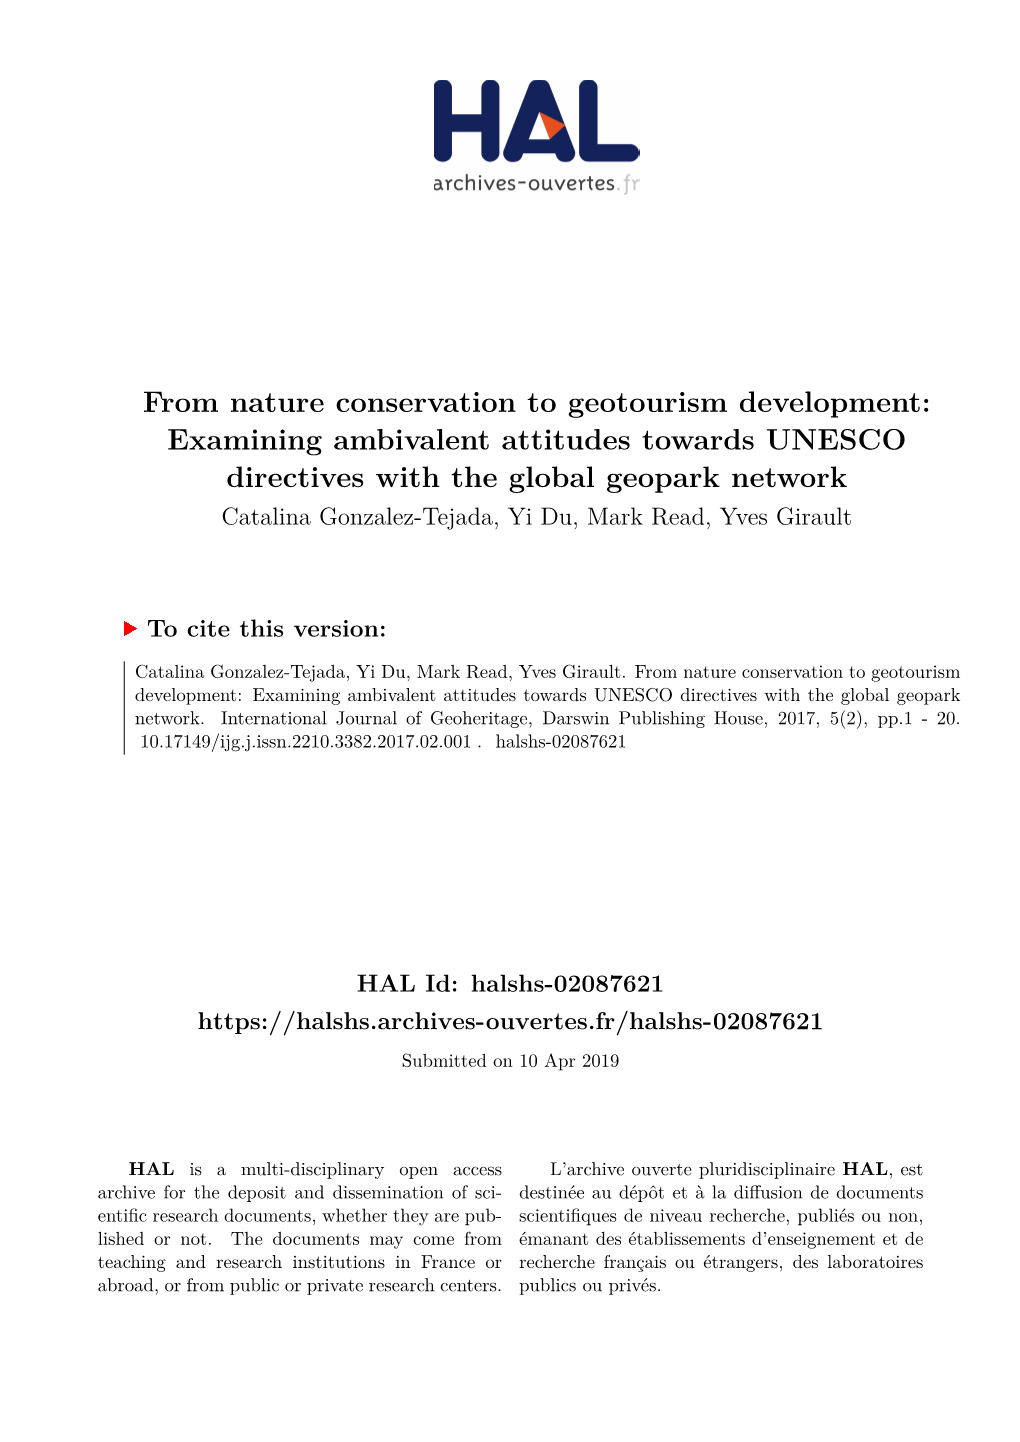 From Nature Conservation to Geotourism Development: Examining Ambivalent Attitudes Towards UNESCO Directives with the Global